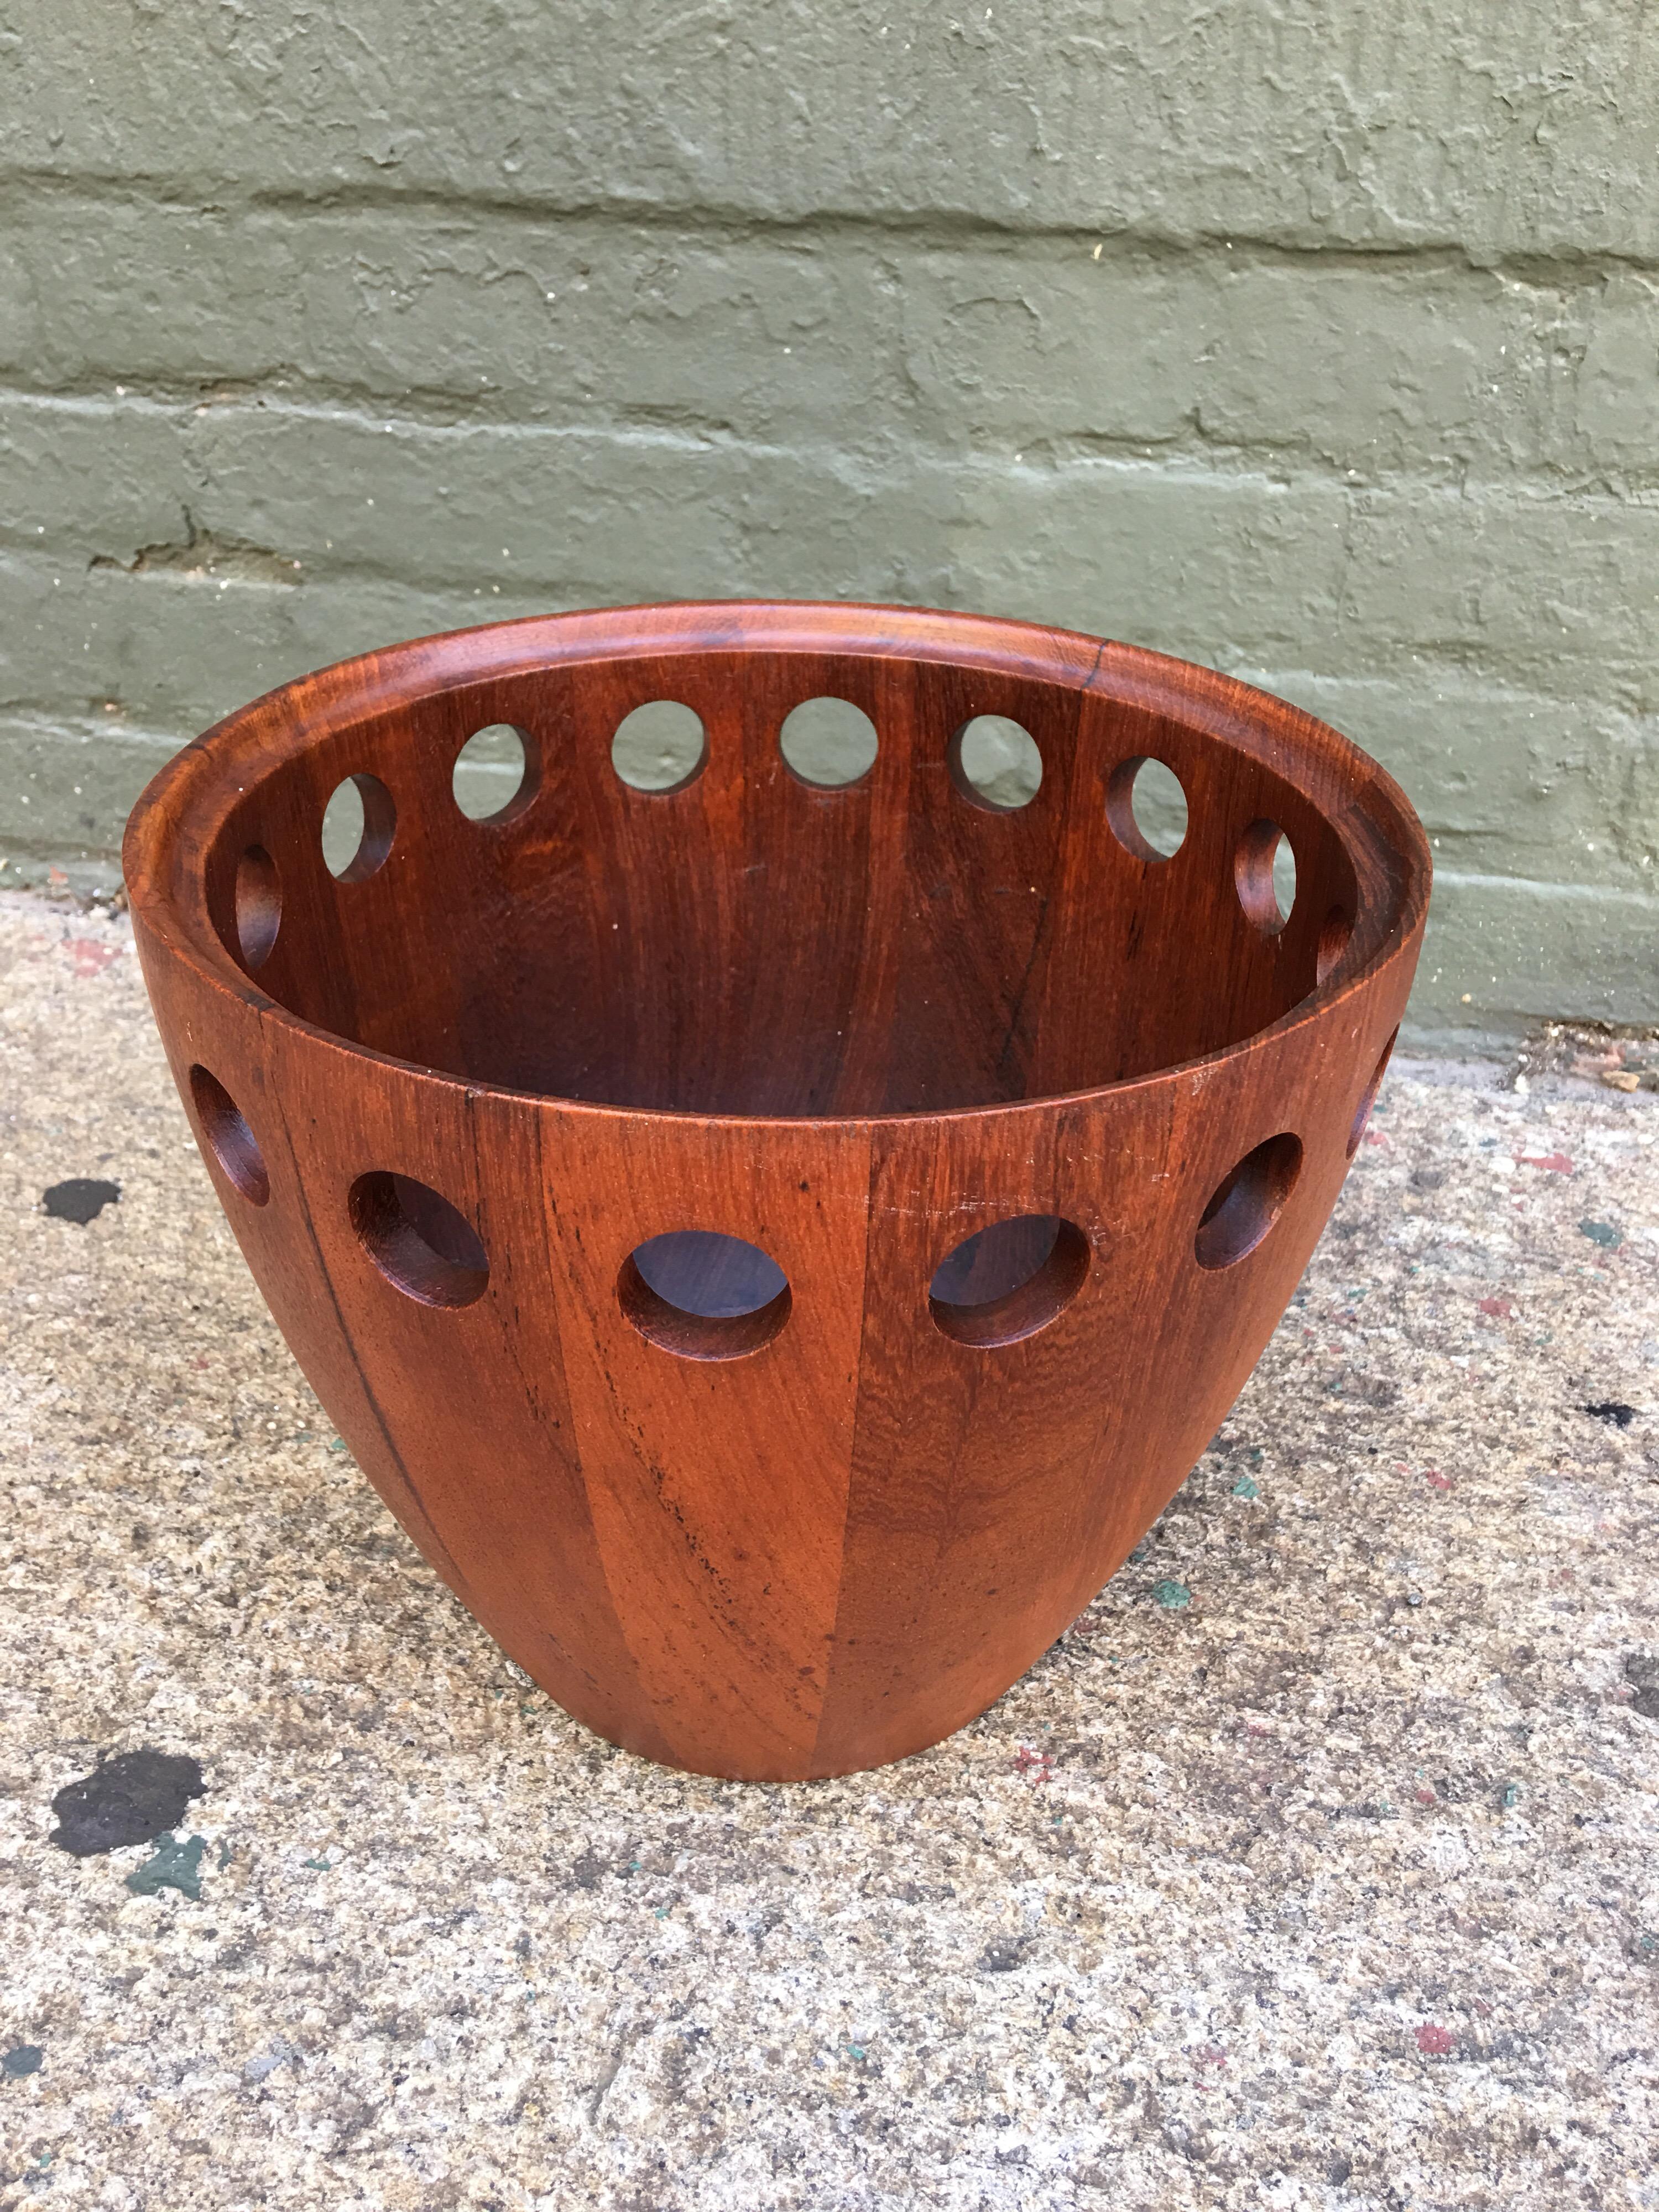 Jens Quistgaard for Dansk fruit bowl in staved teak. Unusual Form with round holes drilled towards top of bowl. Signed on bottom, bowl dated to the mid-1950s.